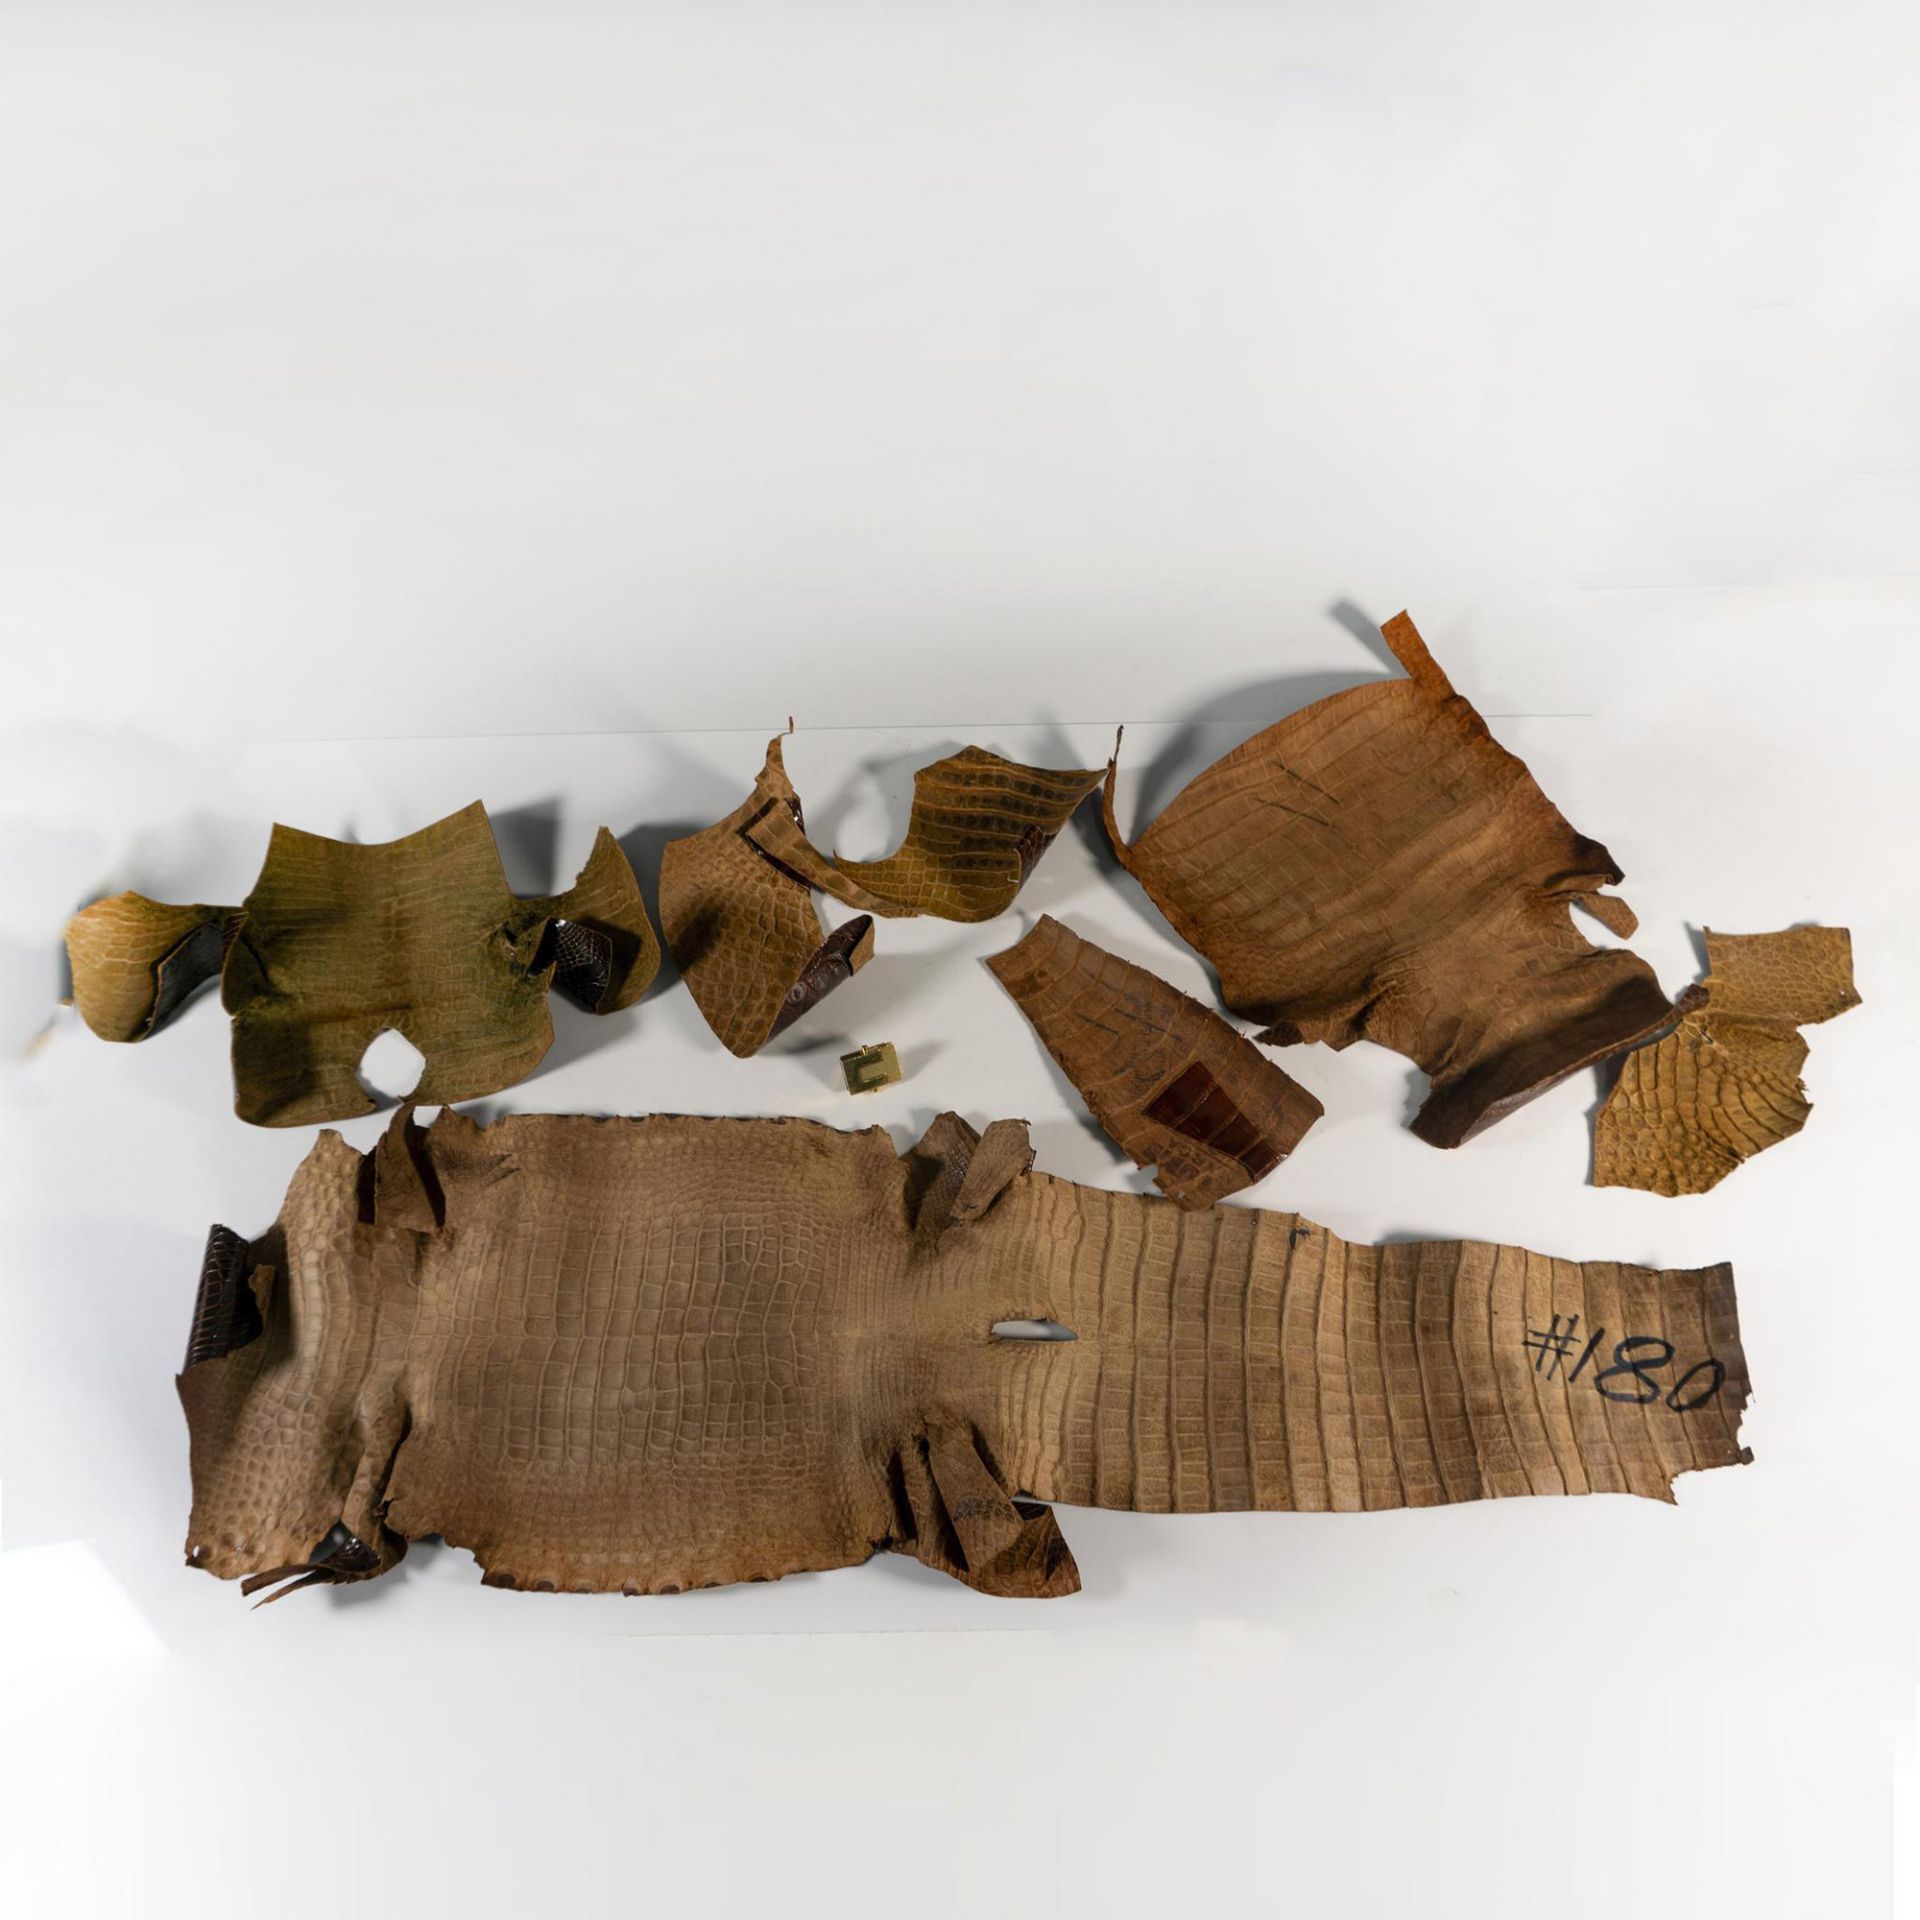 Assorted Pieces of Alligator Tanned Hide - Image 2 of 2